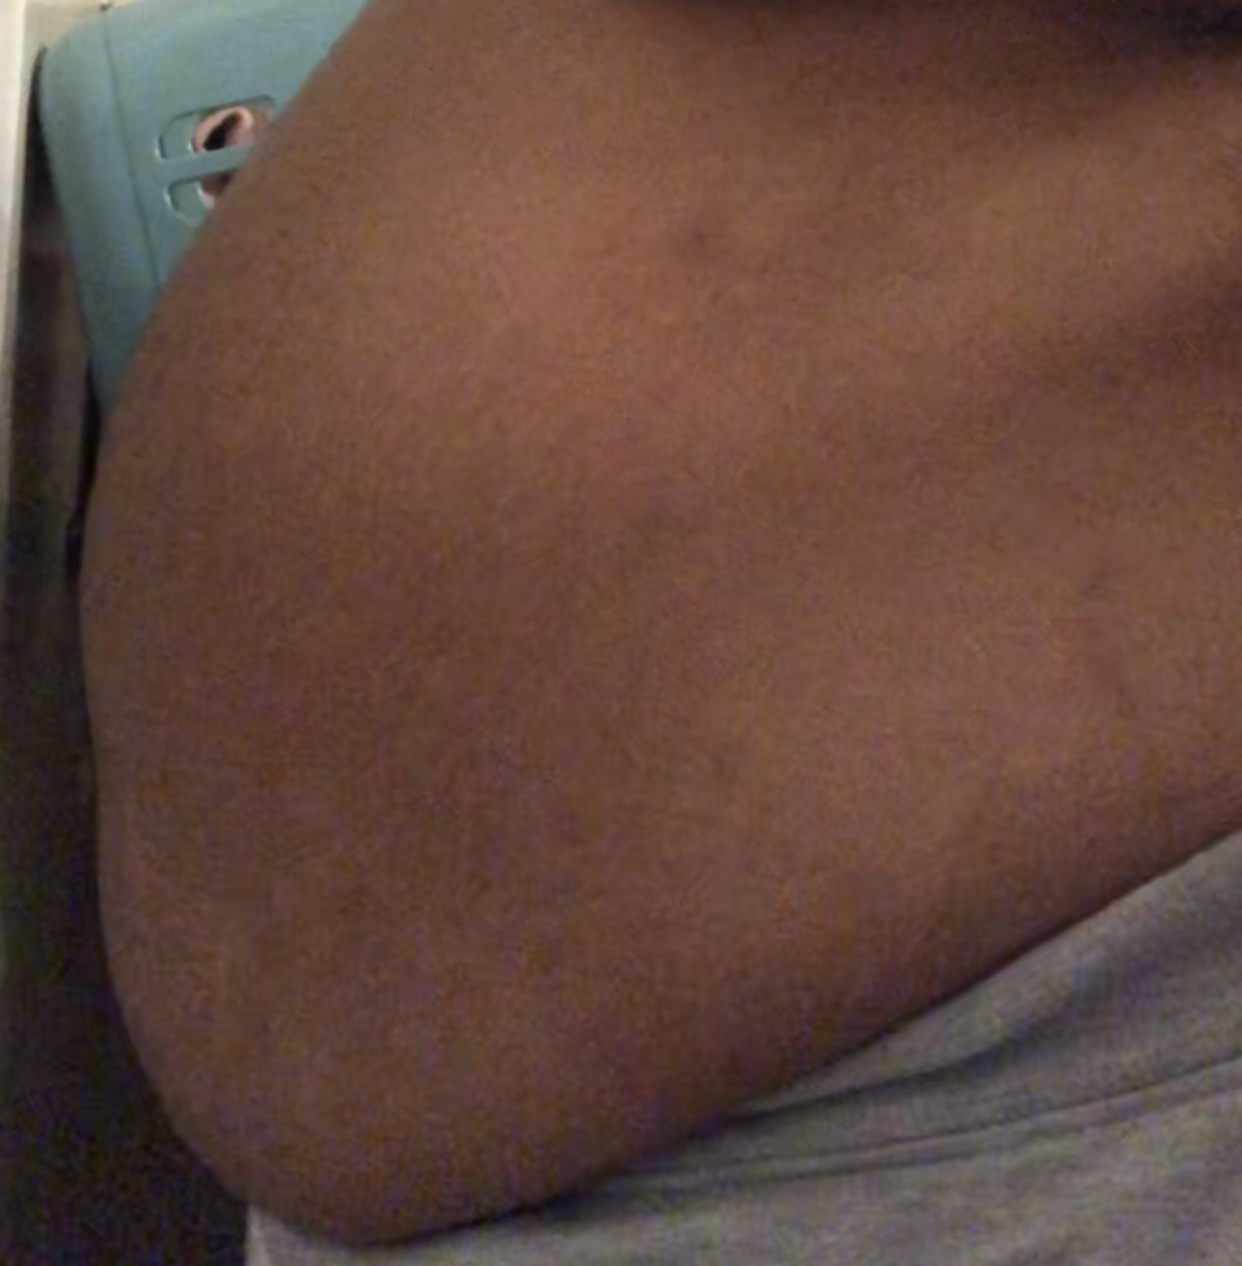 A video of my belly and moobs (short vid)